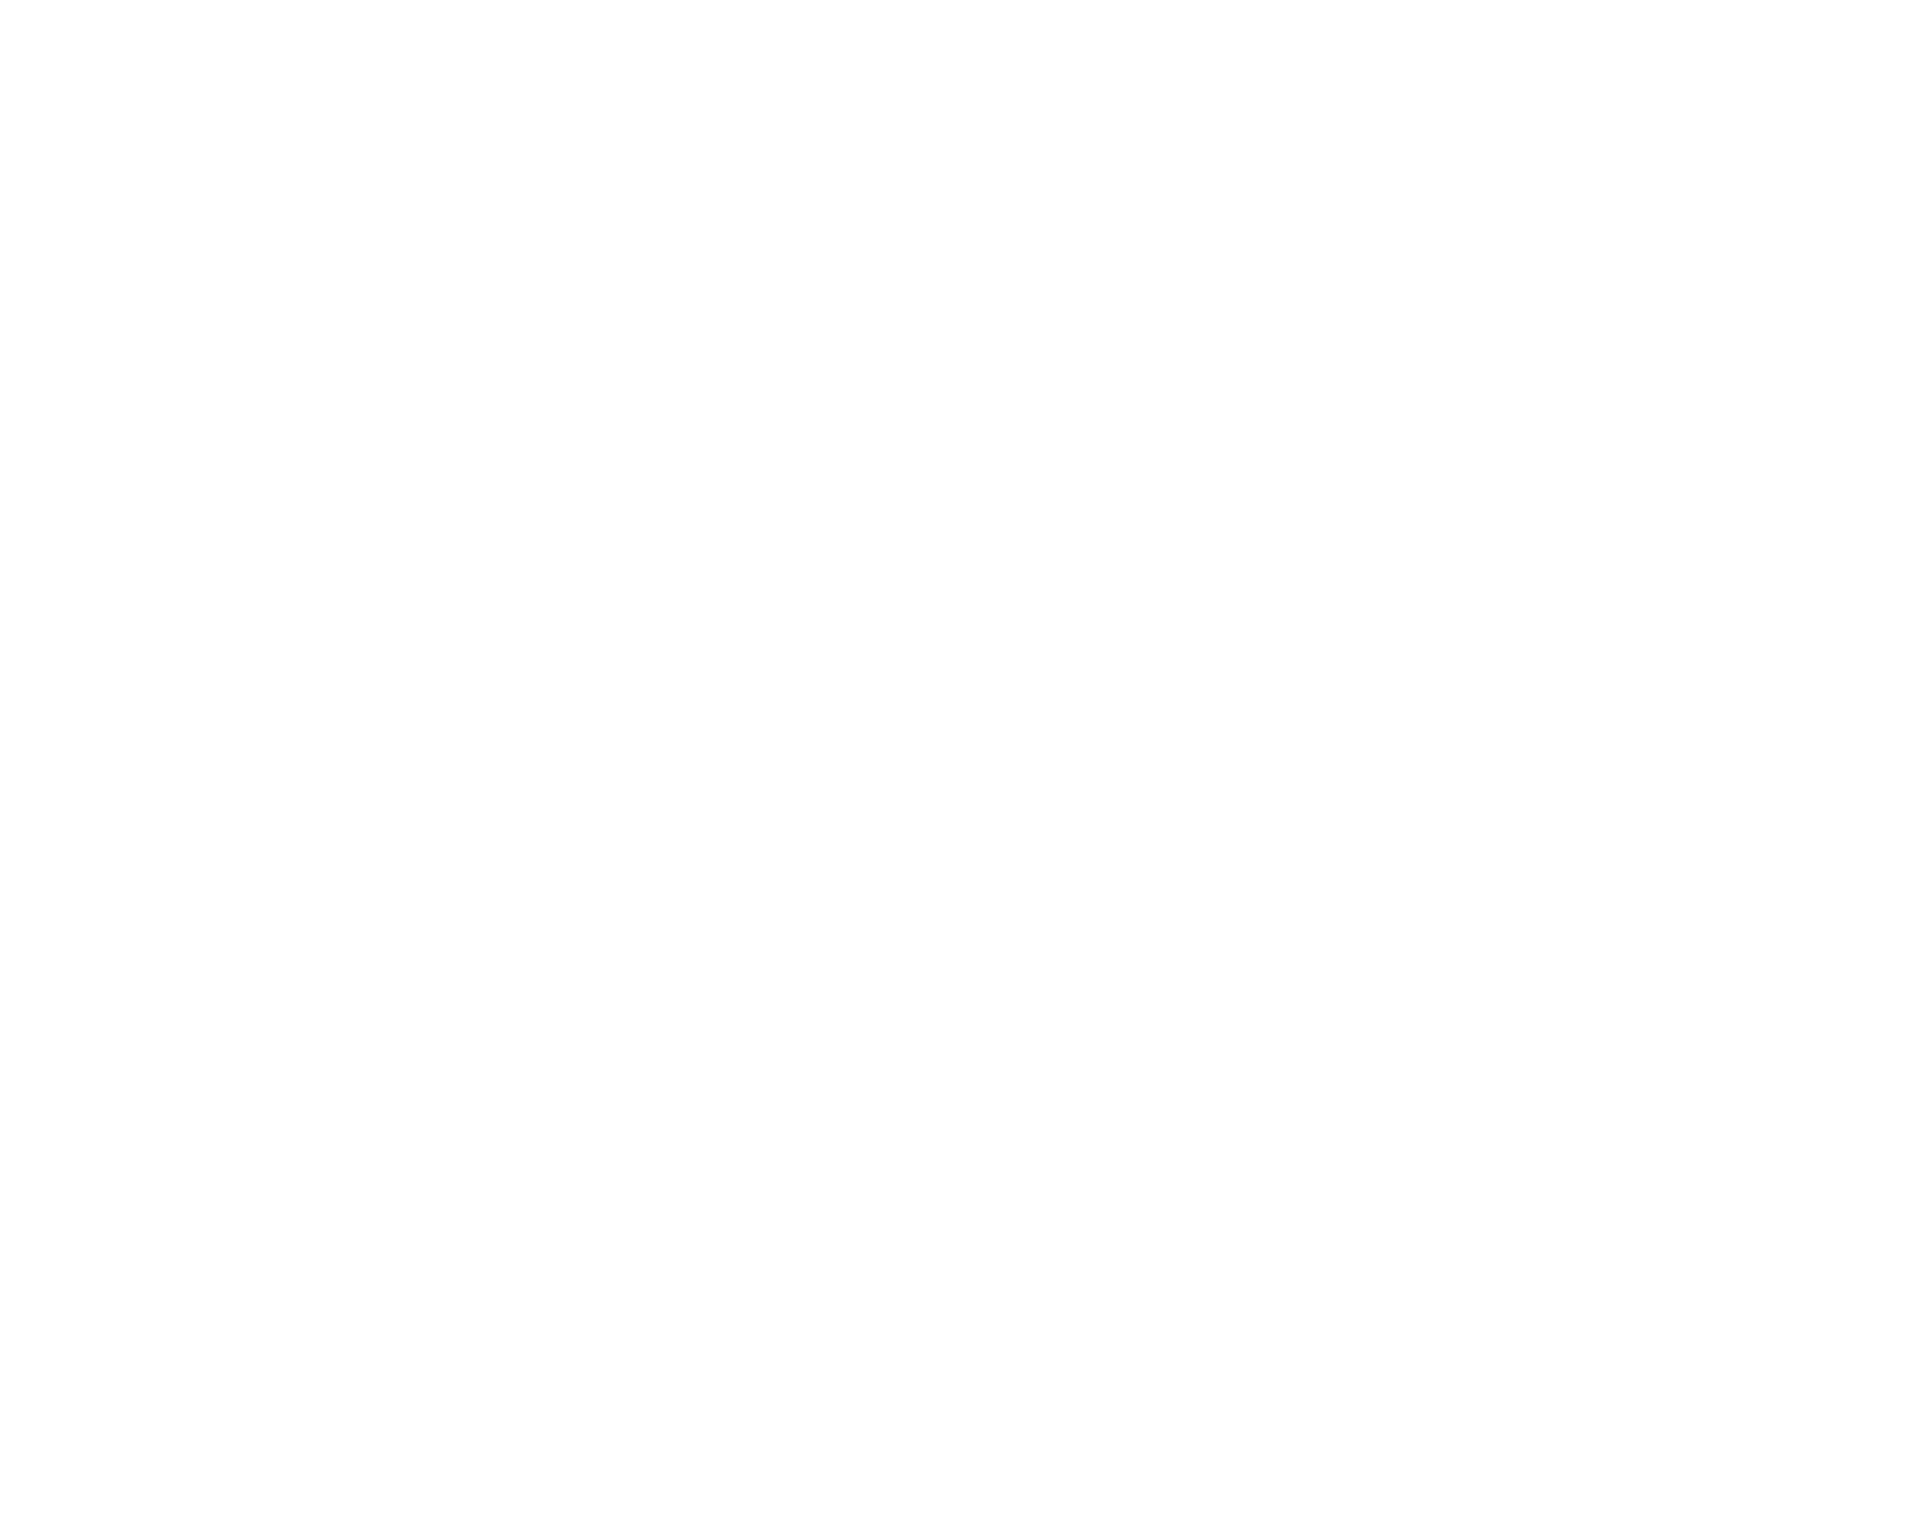 Introducing SLXi Whether you are a driver, retail manager, fleetowner or a business executive, you need to be in con...